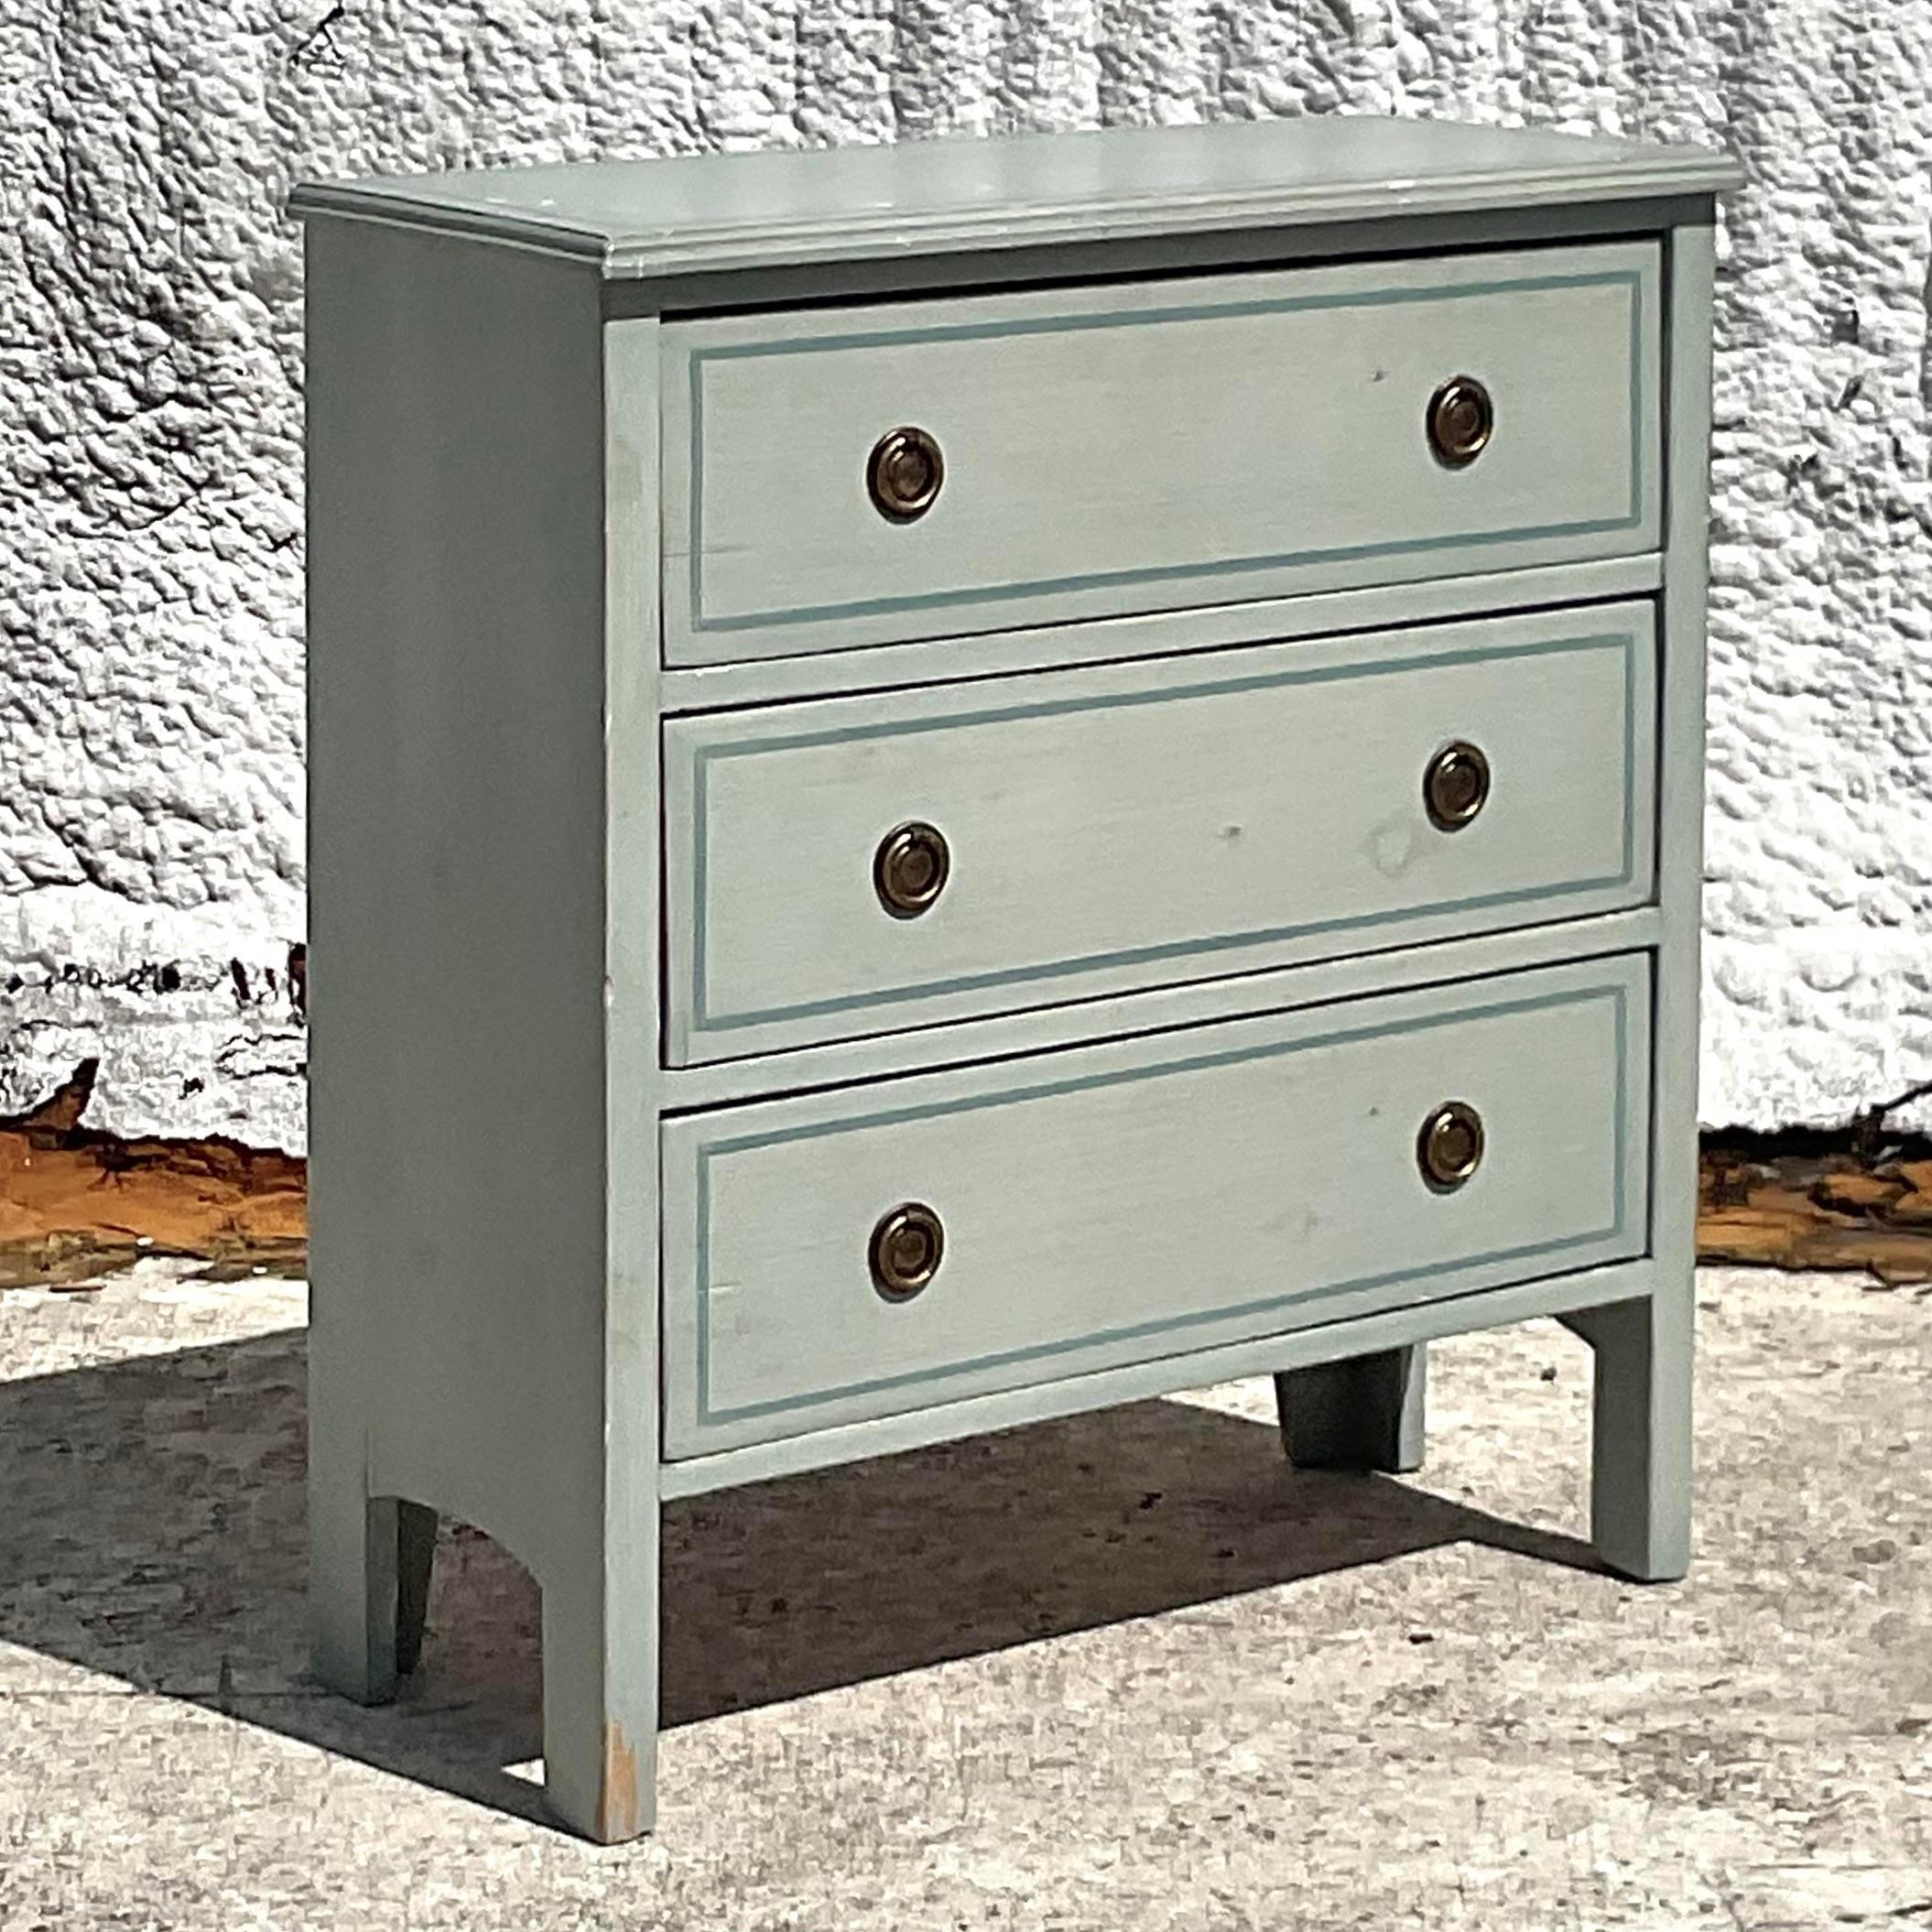 Drawers. Crafted with care and adorned with intricate designs, this chest embodies the eclectic spirit of American bohemian style. Perfect for storing treasures and adding a unique focal point to any room, it's a blend of functionality and artistic